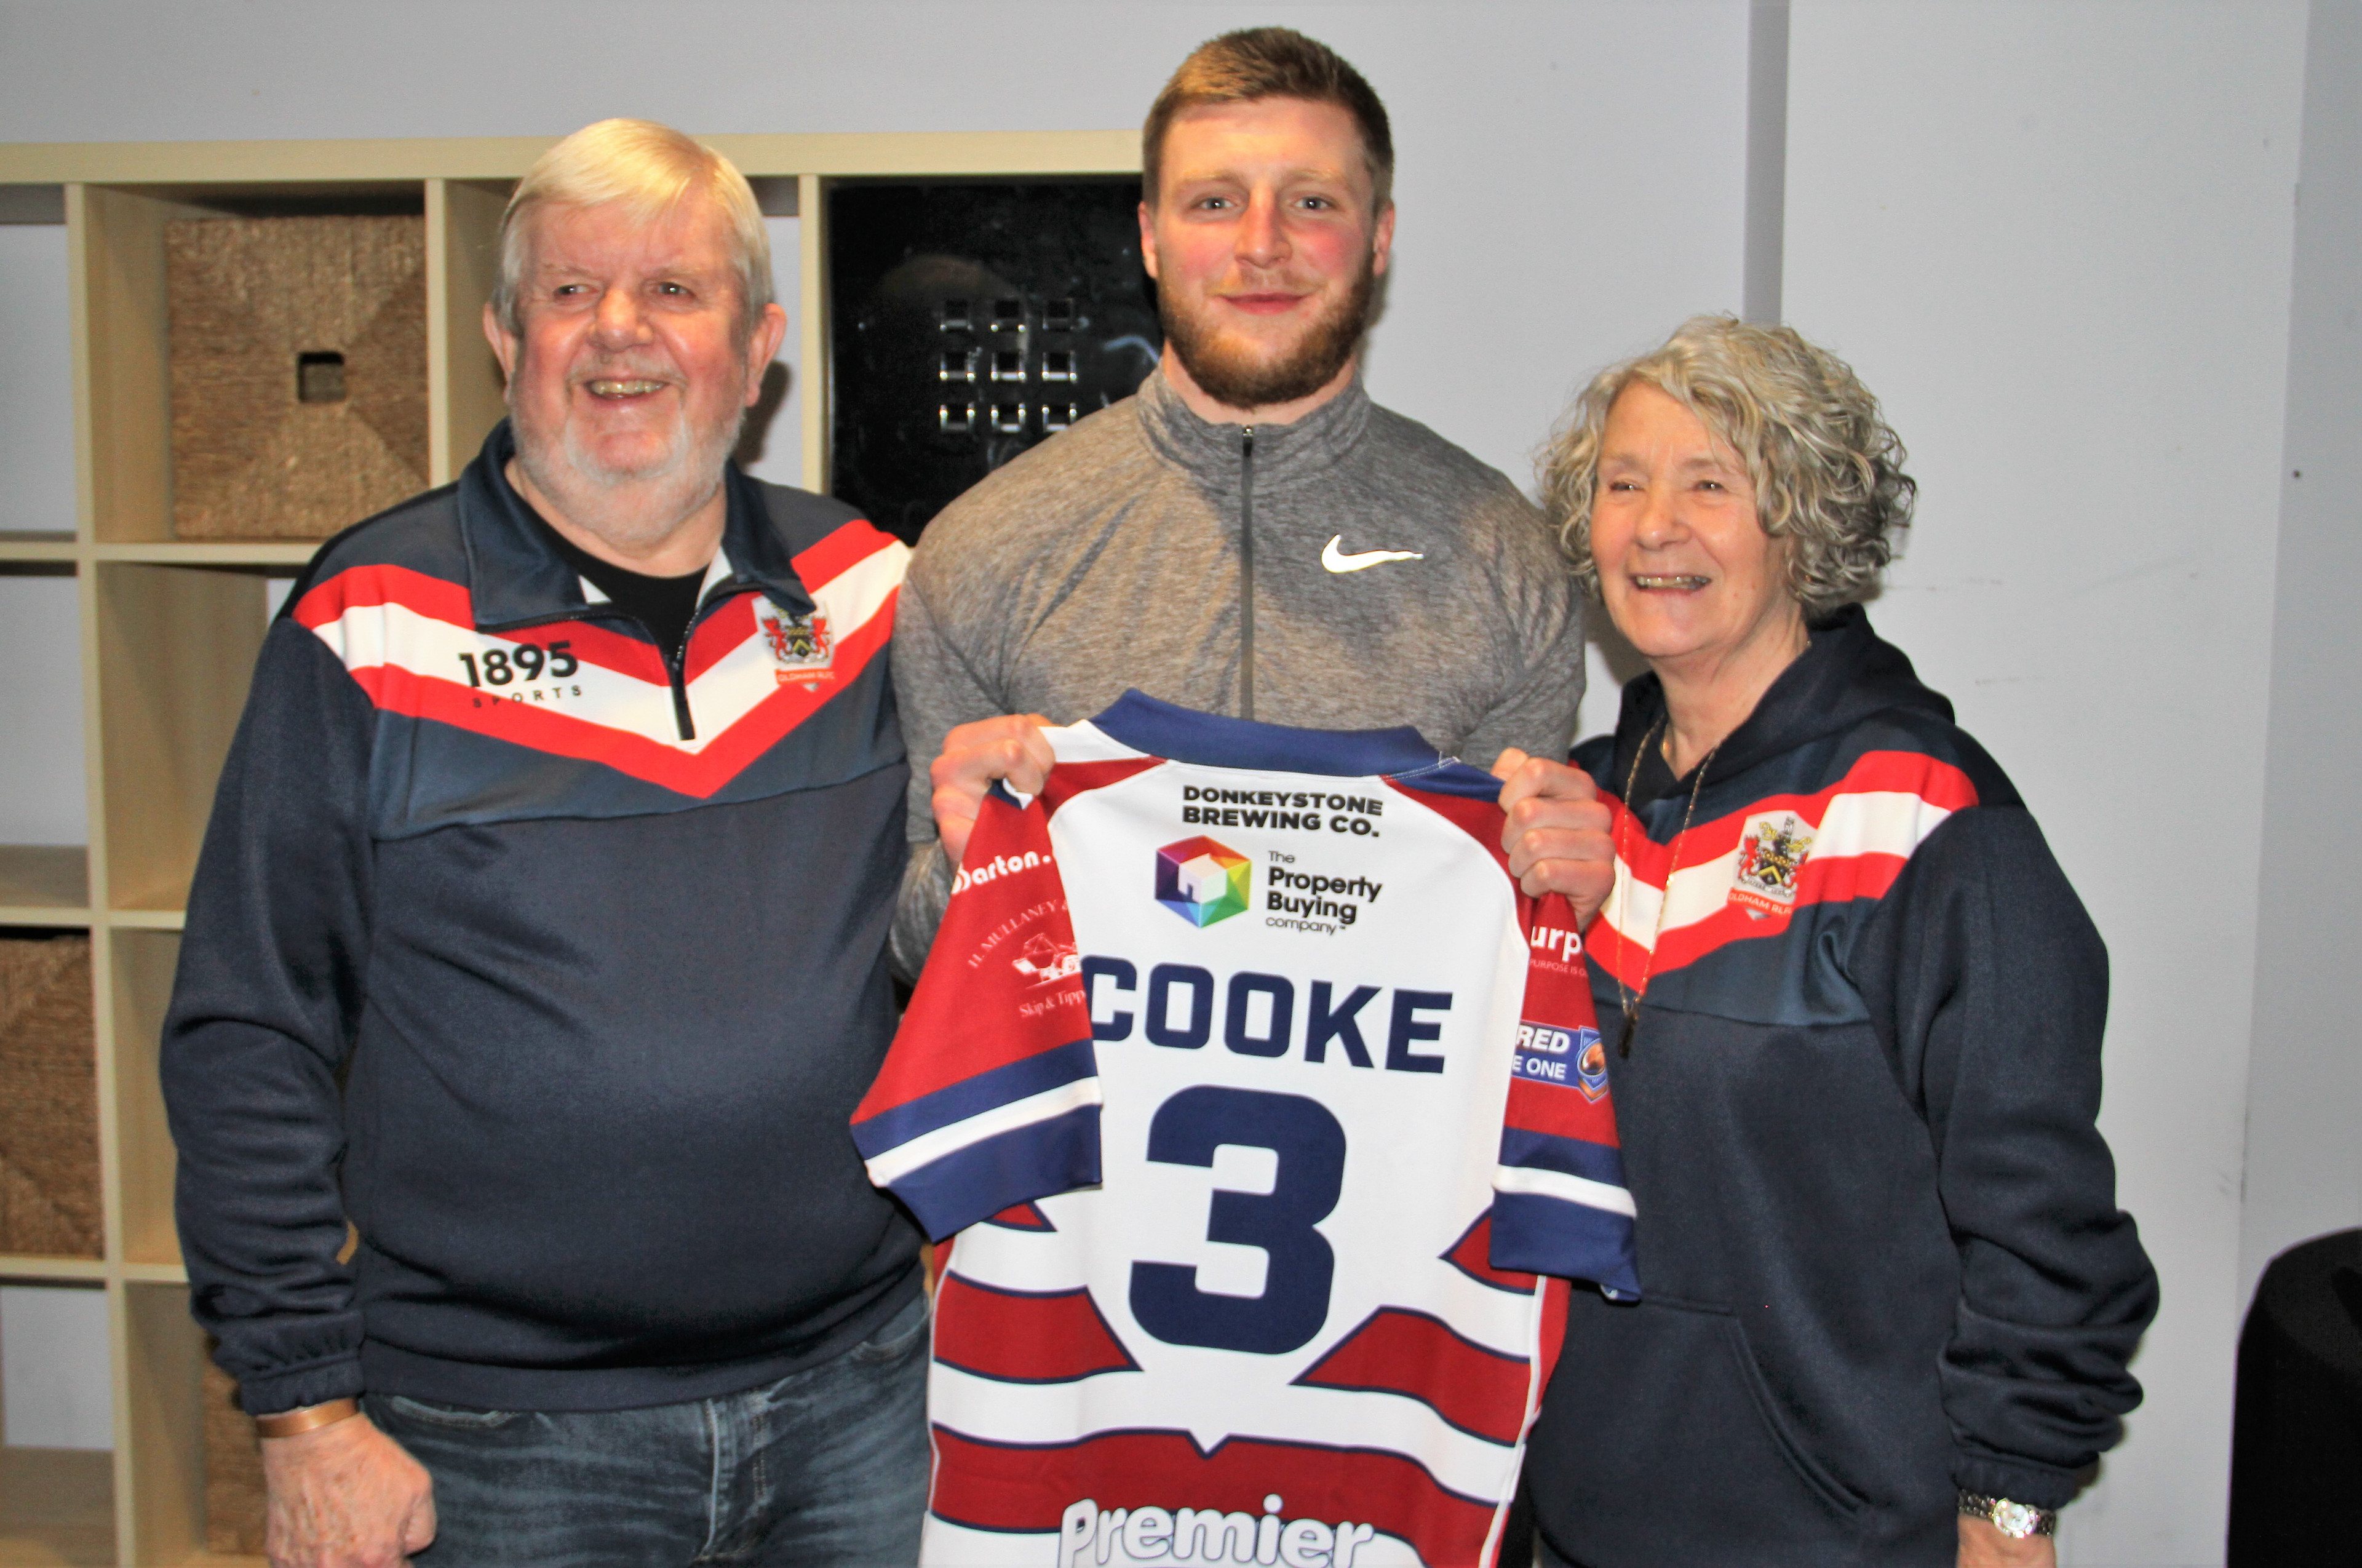 John and Lynda McAndrew with their player, centre Will Cooke